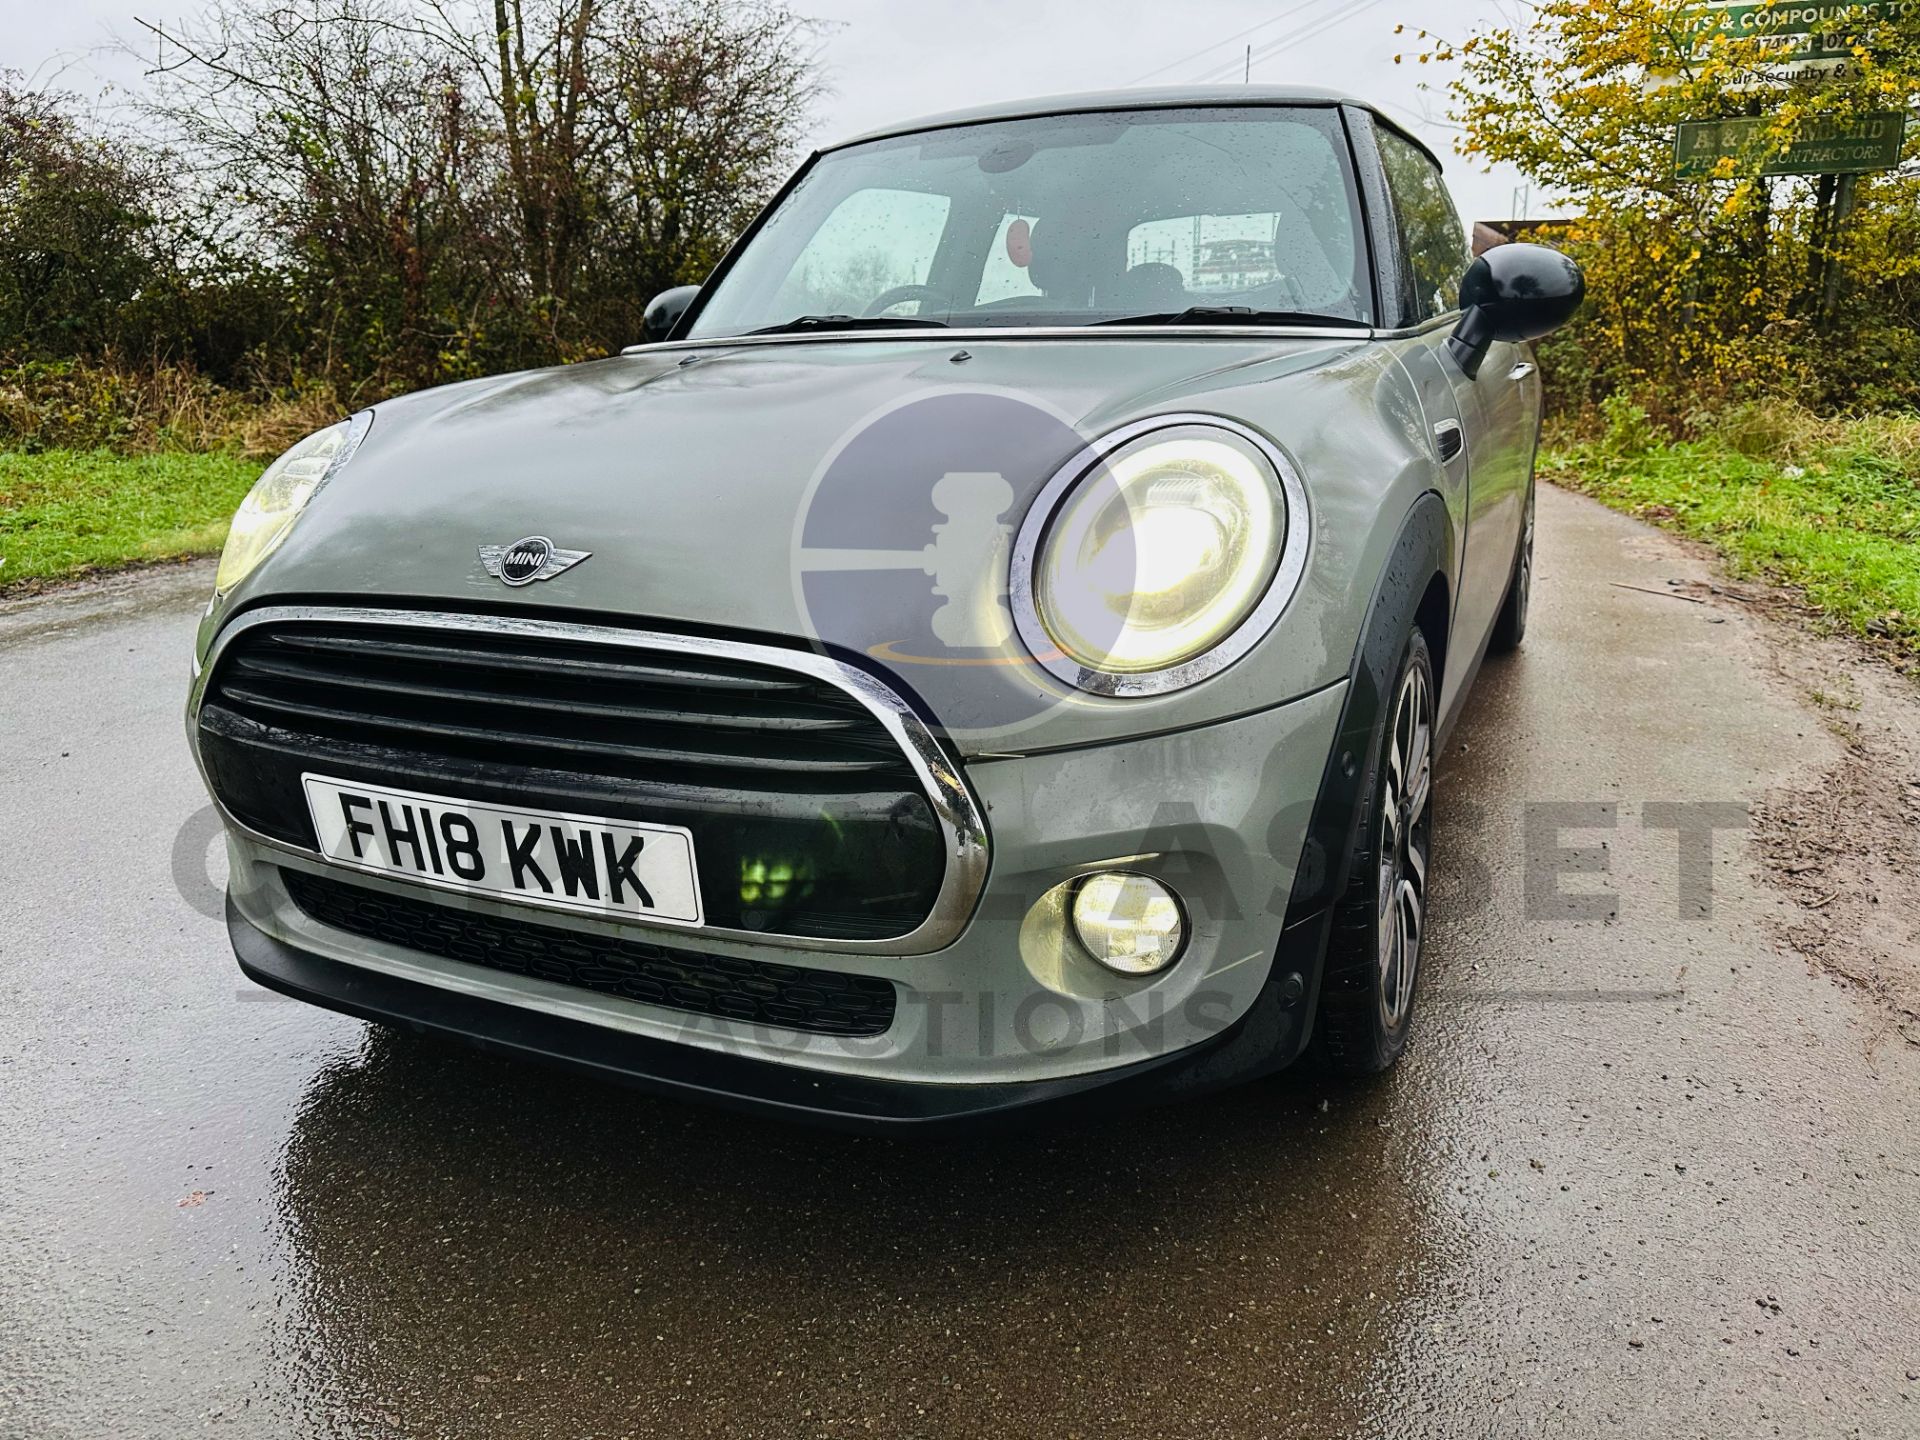 (ON SALE) MINI ONE 1.5 PETROL (18 REG) - START / STOP -AIR CONDITIONING -ONLY 35K MILES - NO VAT! - Image 6 of 39